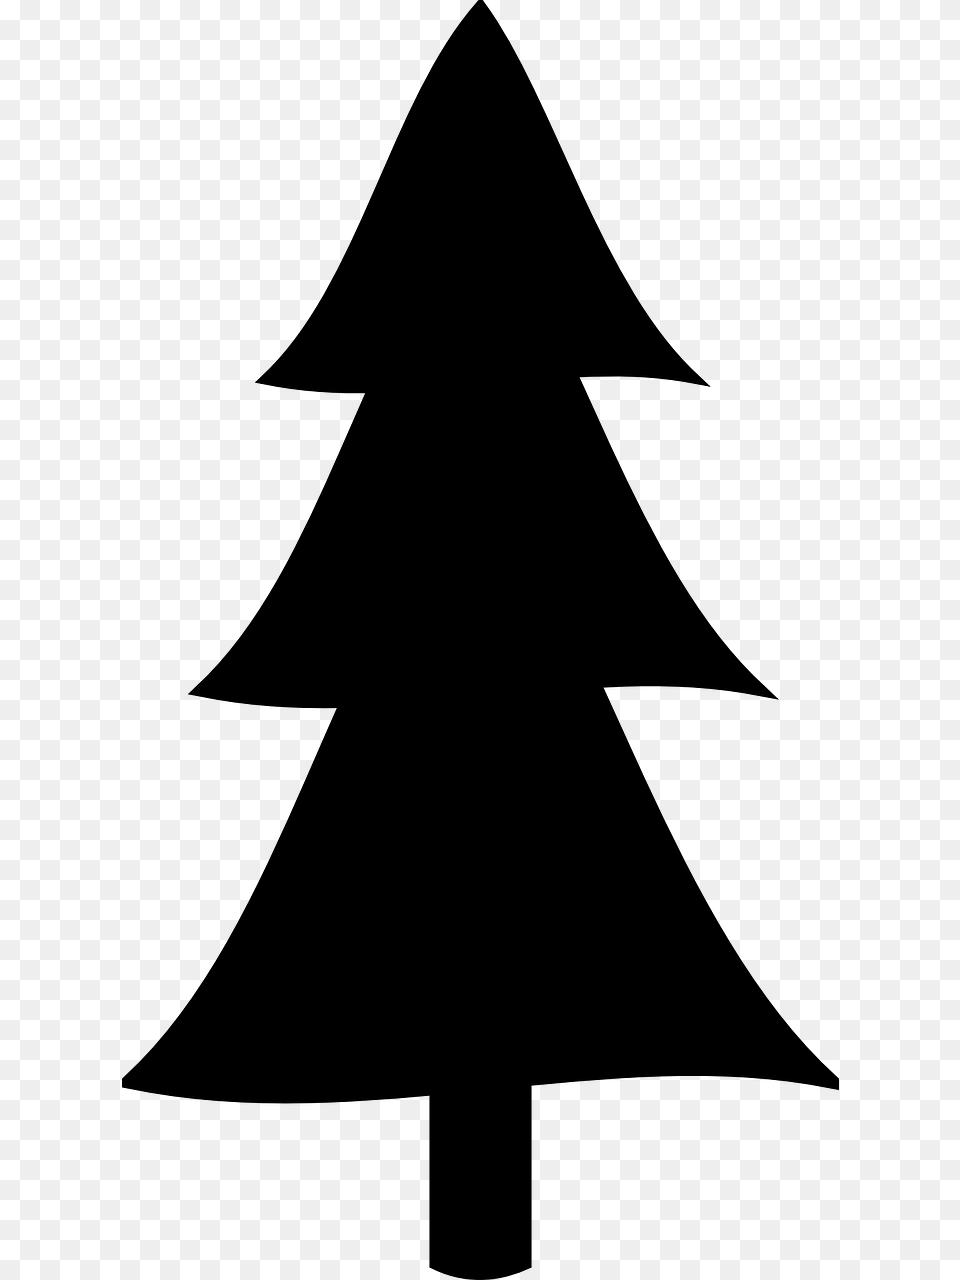 Christmas Tree Fir Clip Art Clipart Pine Tree Silhouette, Gray Free Transparent Png